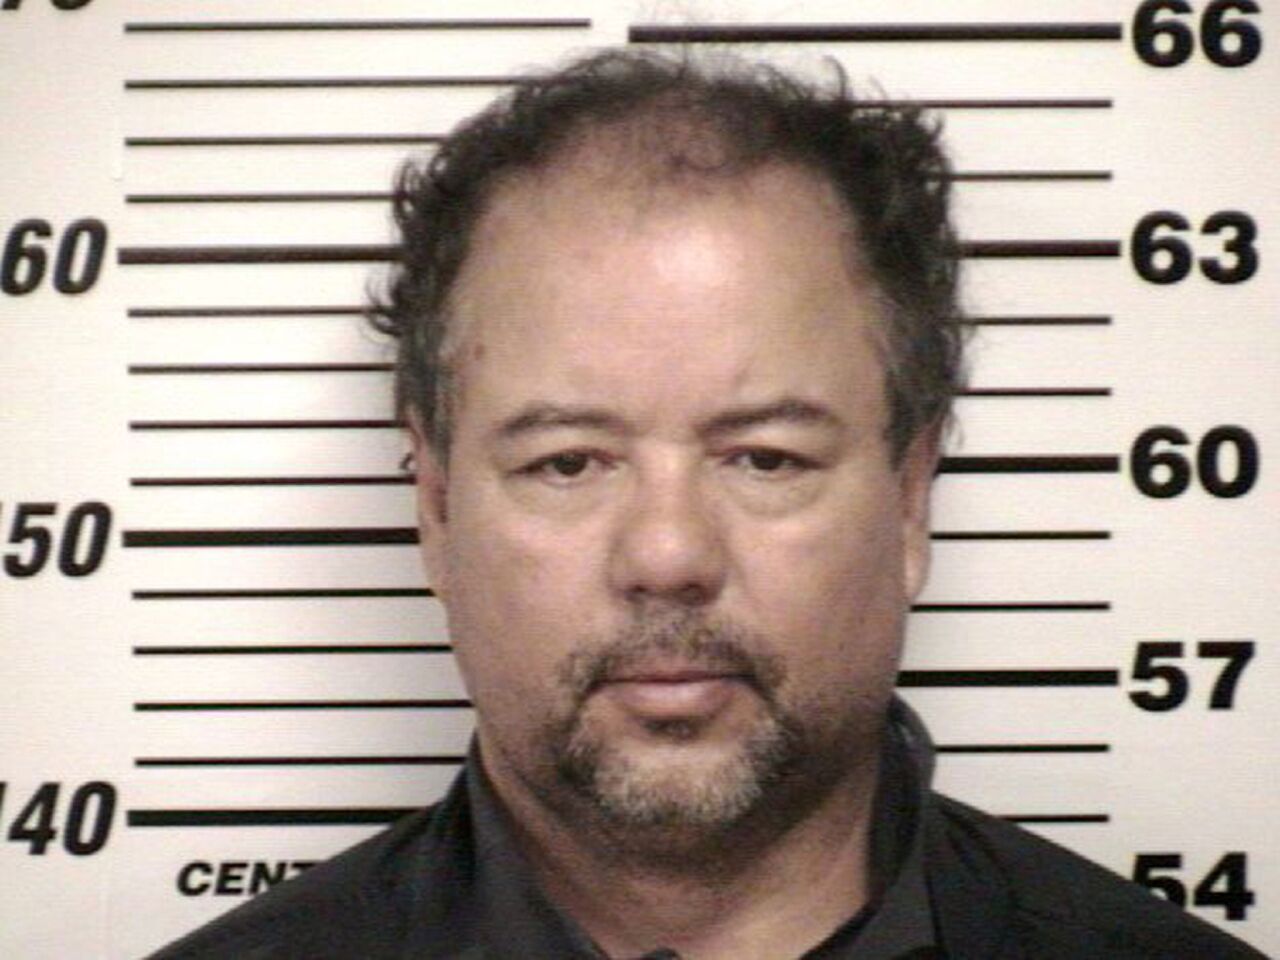 Cuyahoga County sheriff's booking photo of Ariel Castro.